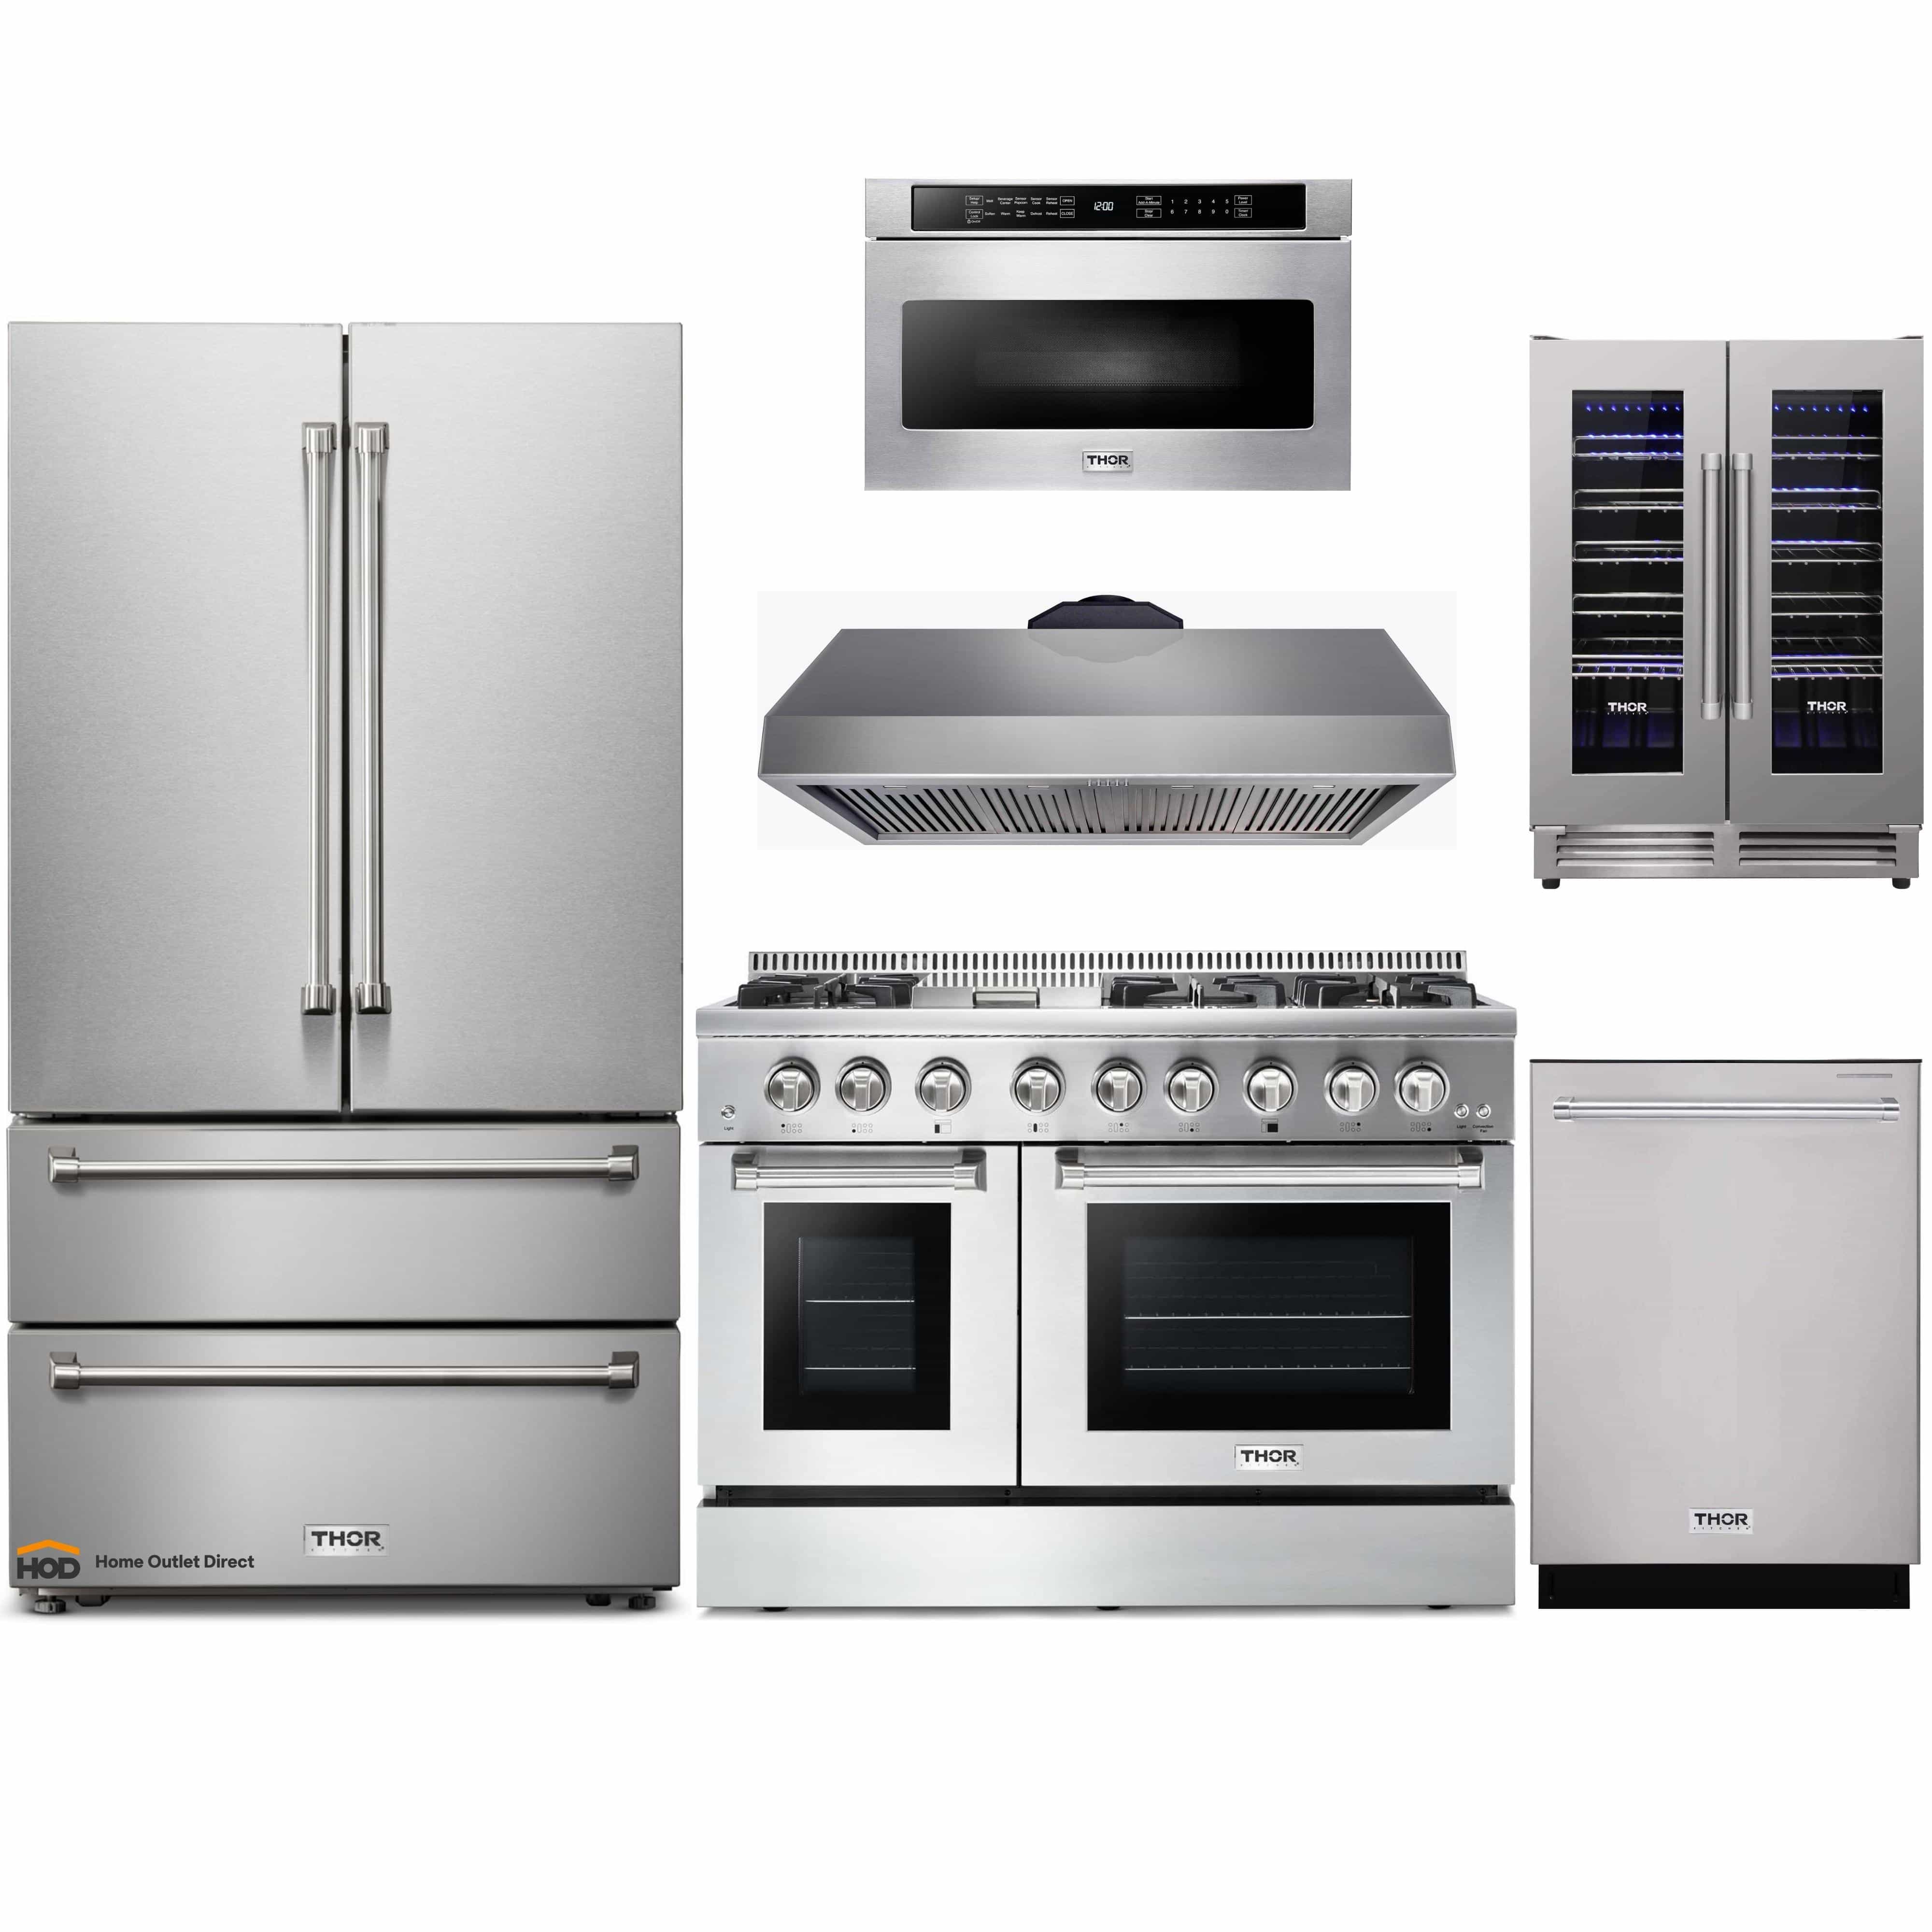 Thor Kitchen 6-Piece Pro Appliance Package - 48-Inch Dual Fuel Range, French Door Refrigerator, Dishwasher, Under Cabinet 16.5-Inch Tall Hood, Microwave Drawer, & Wine Cooler in Stainless Steel